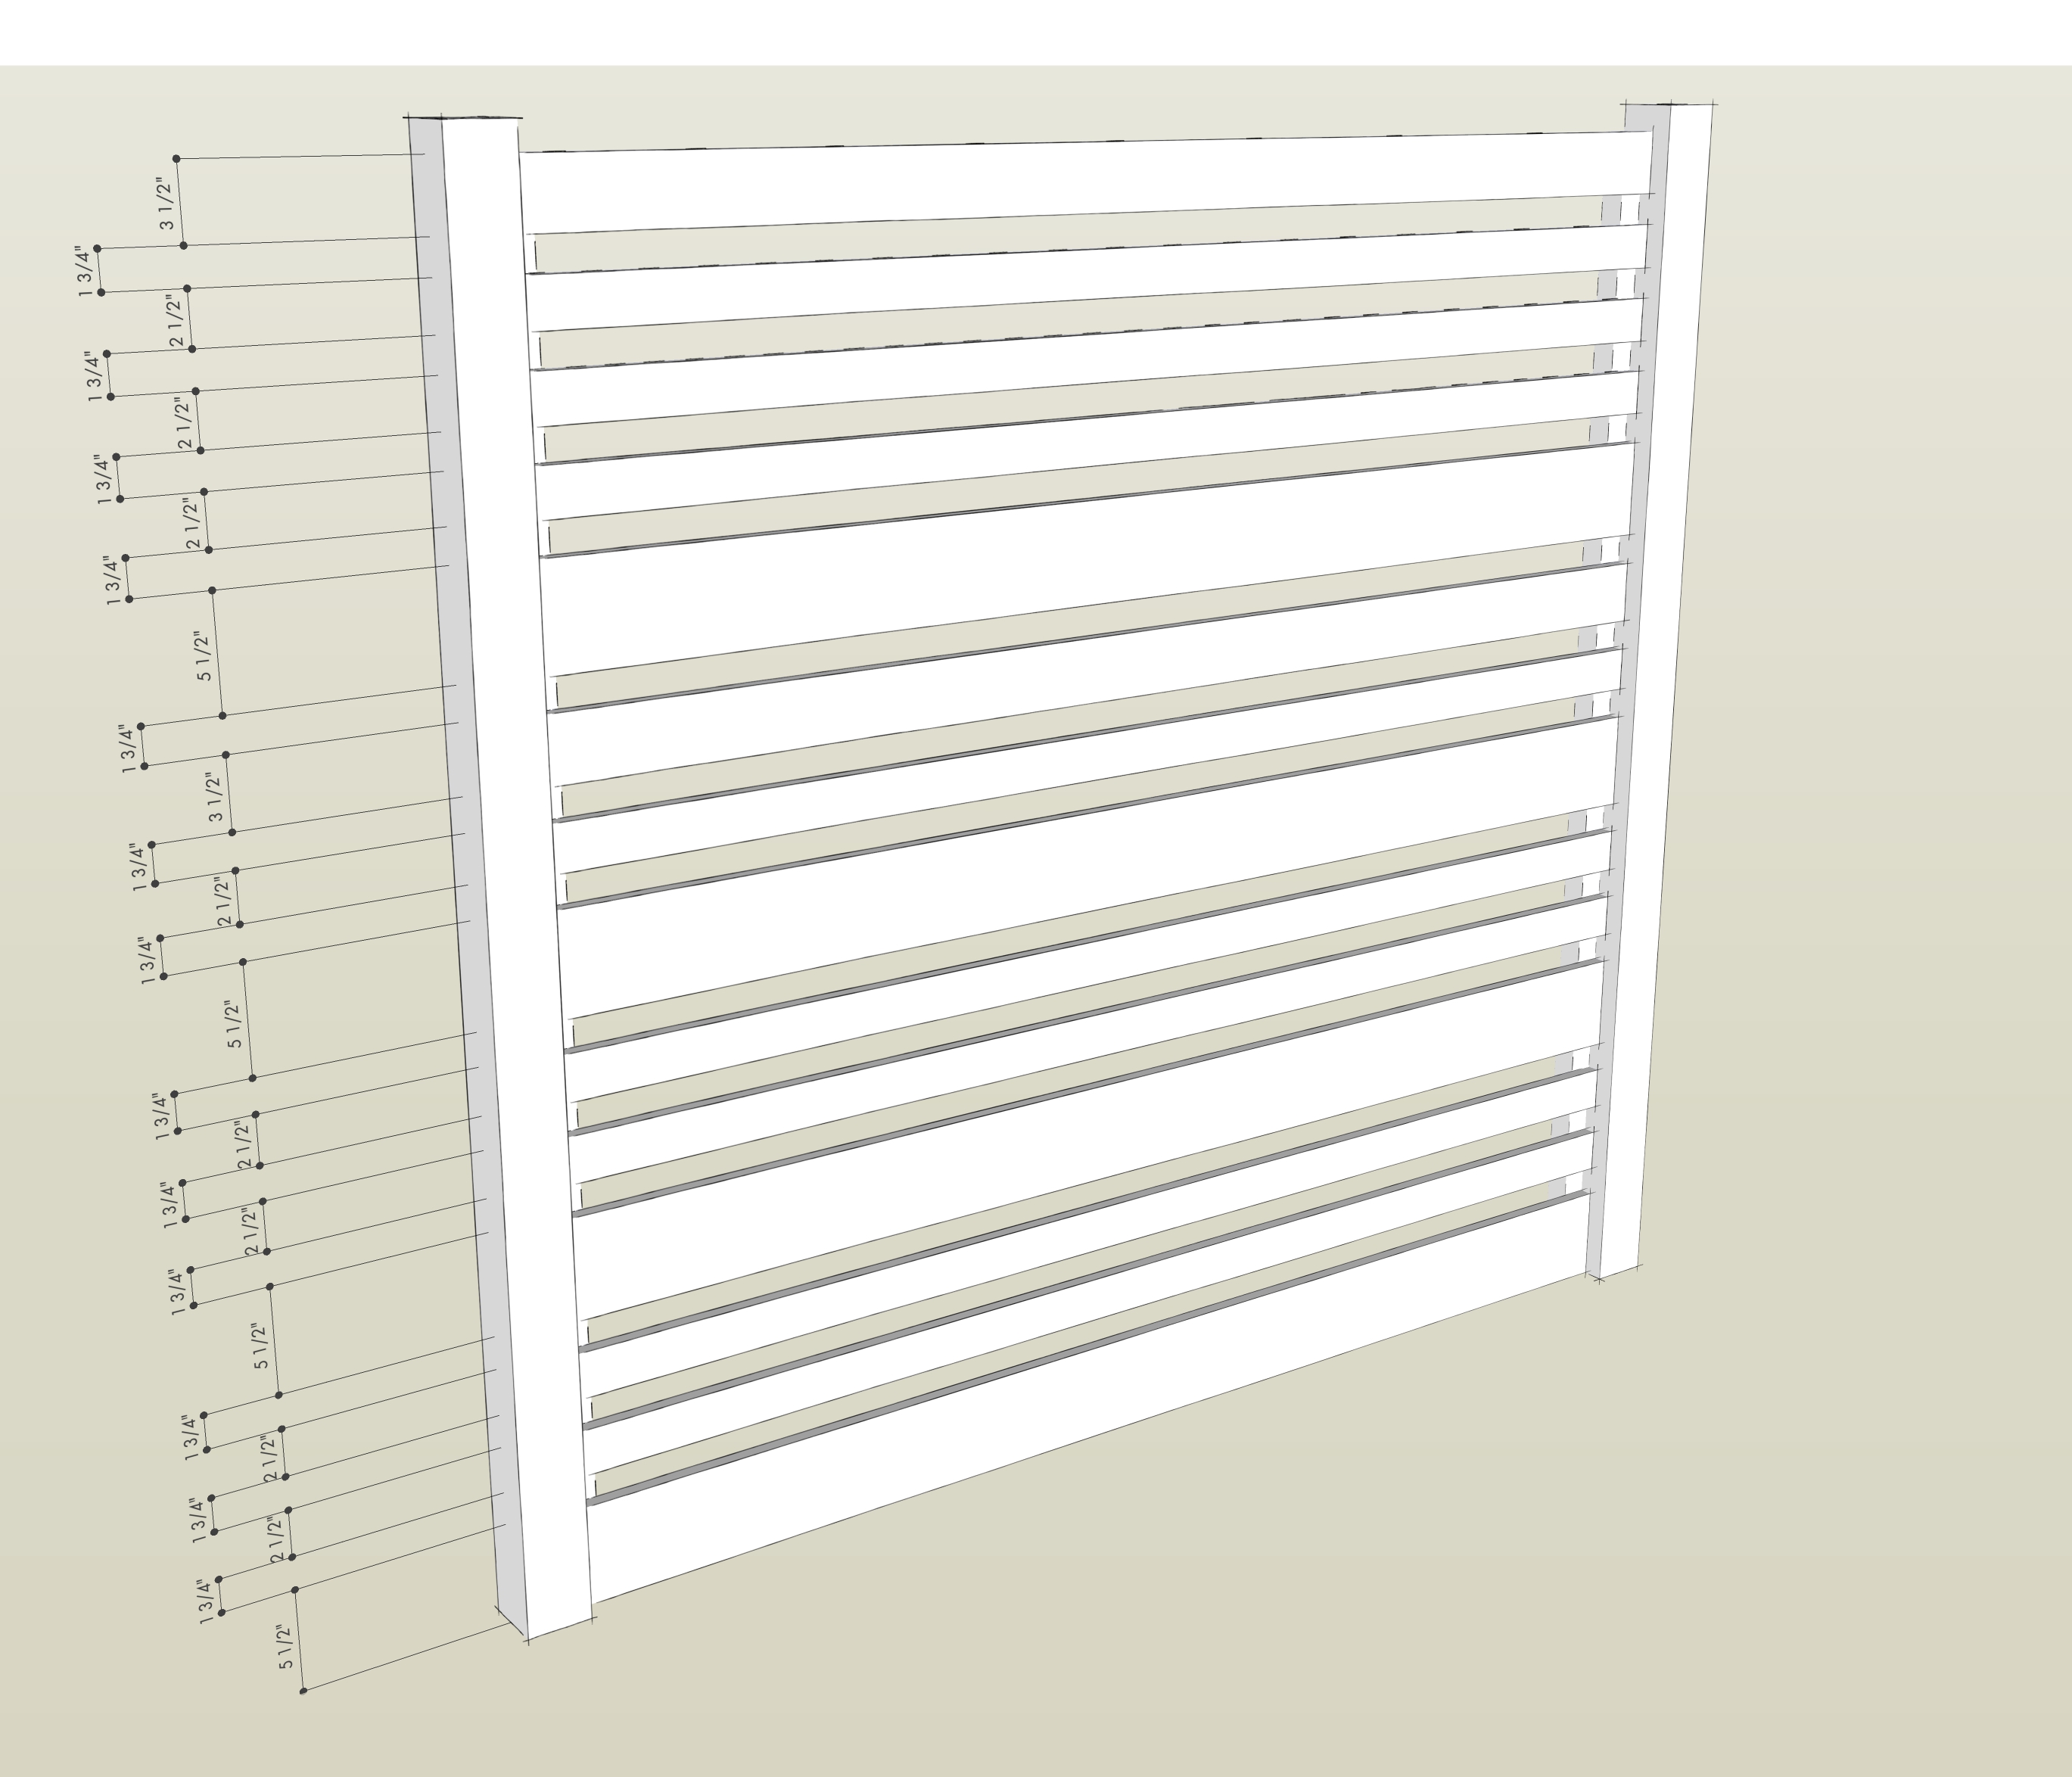 Horizontal Fence with Plans and Dimensions | Deuce Cities Henhouse